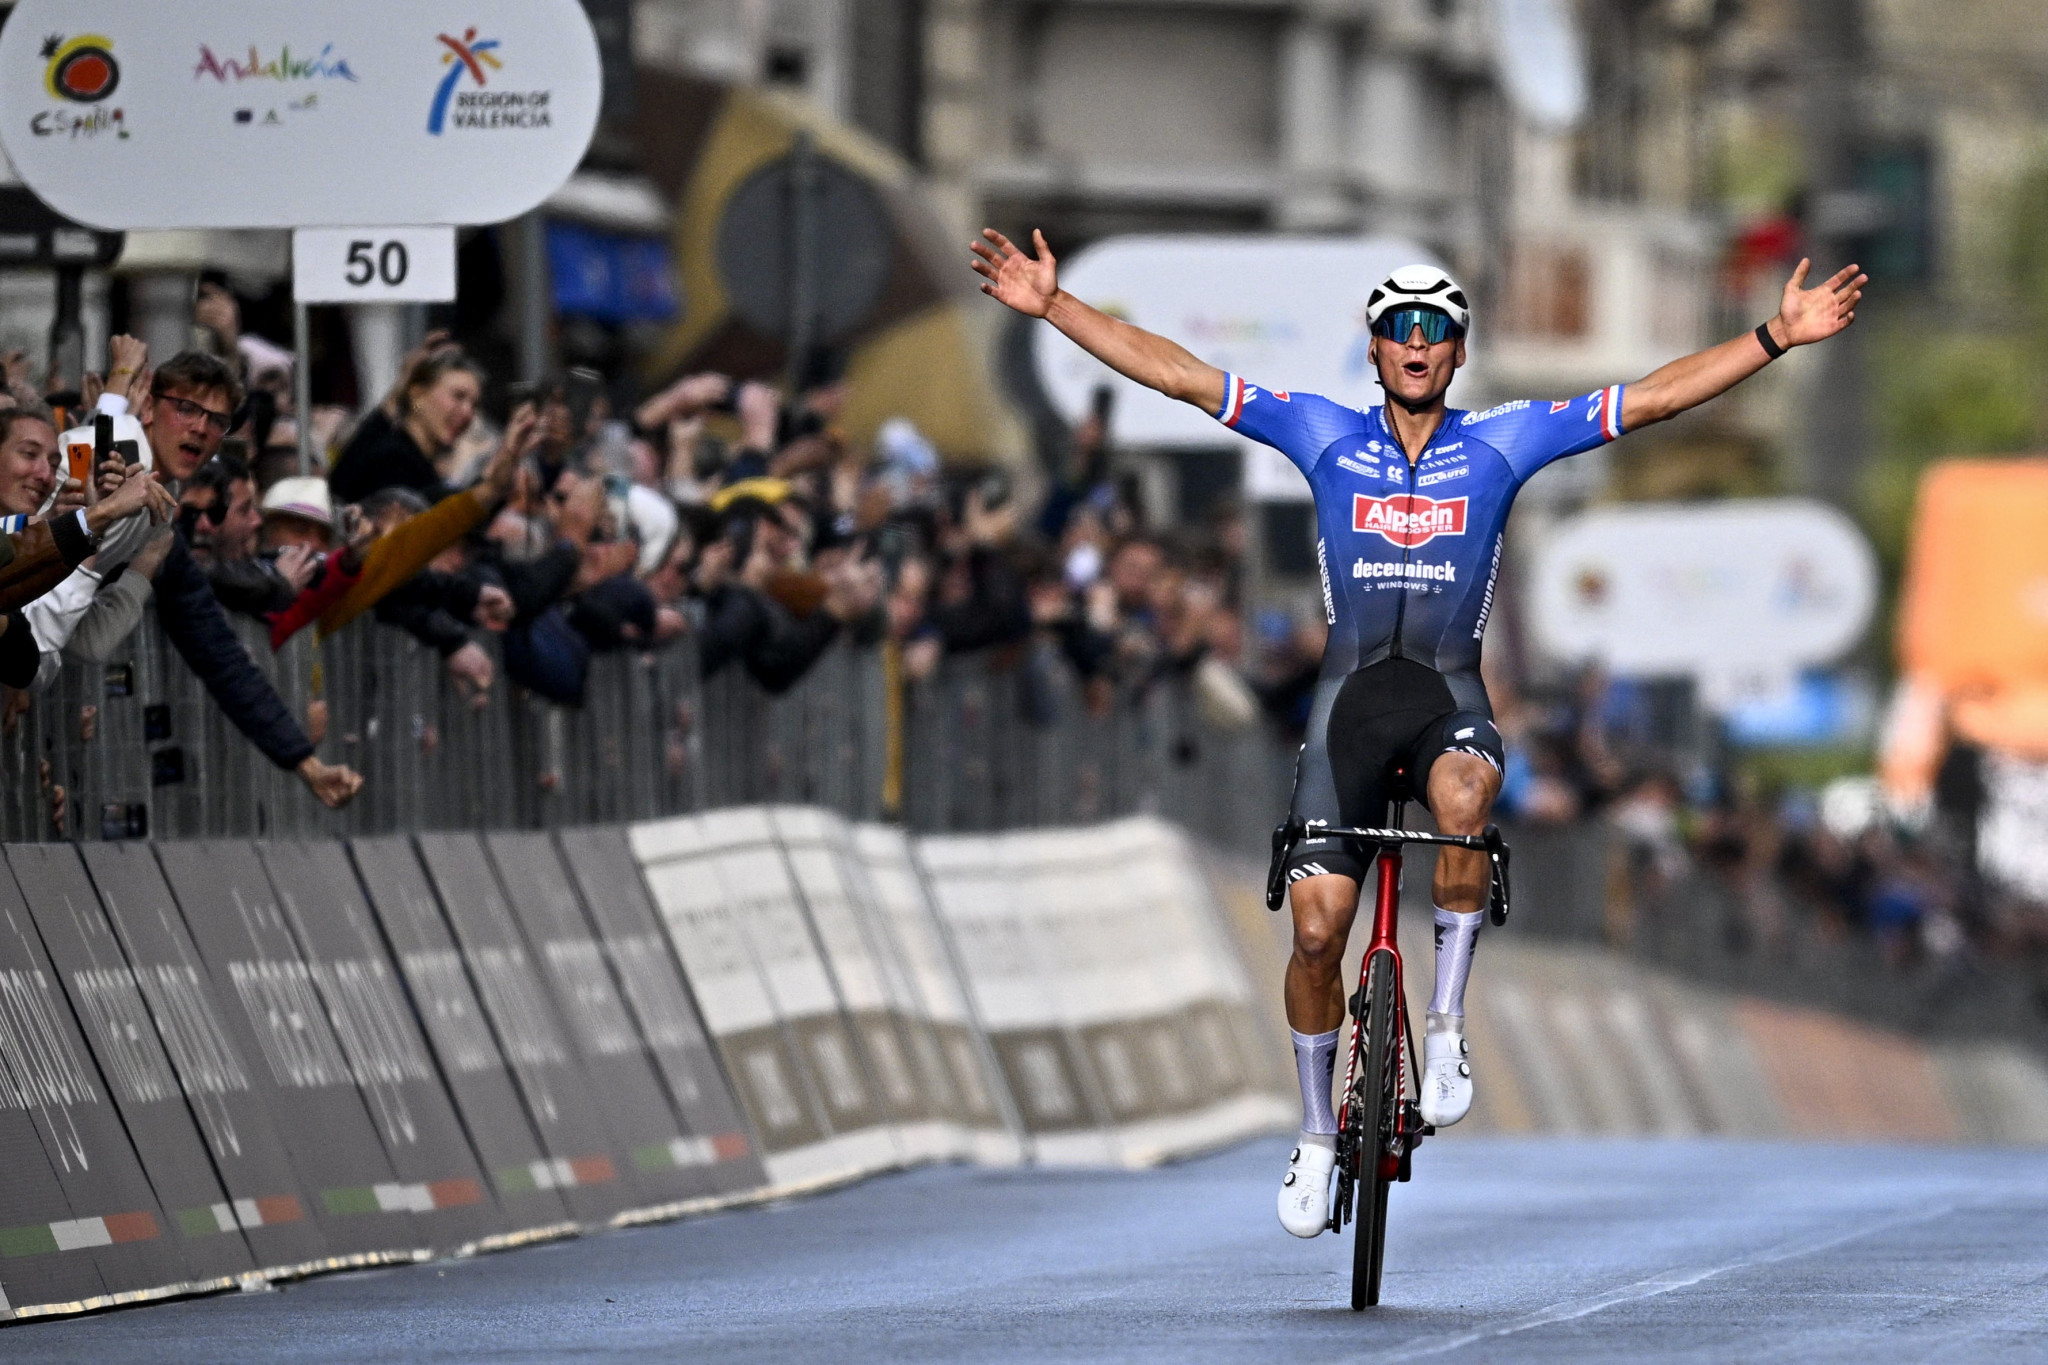 The Netherlands’ Mathieu Van der Poel won today's Milan-Sanremo race to emulate his grandfather, Raymond Poulidor, the 1961 winner ©Getty Images